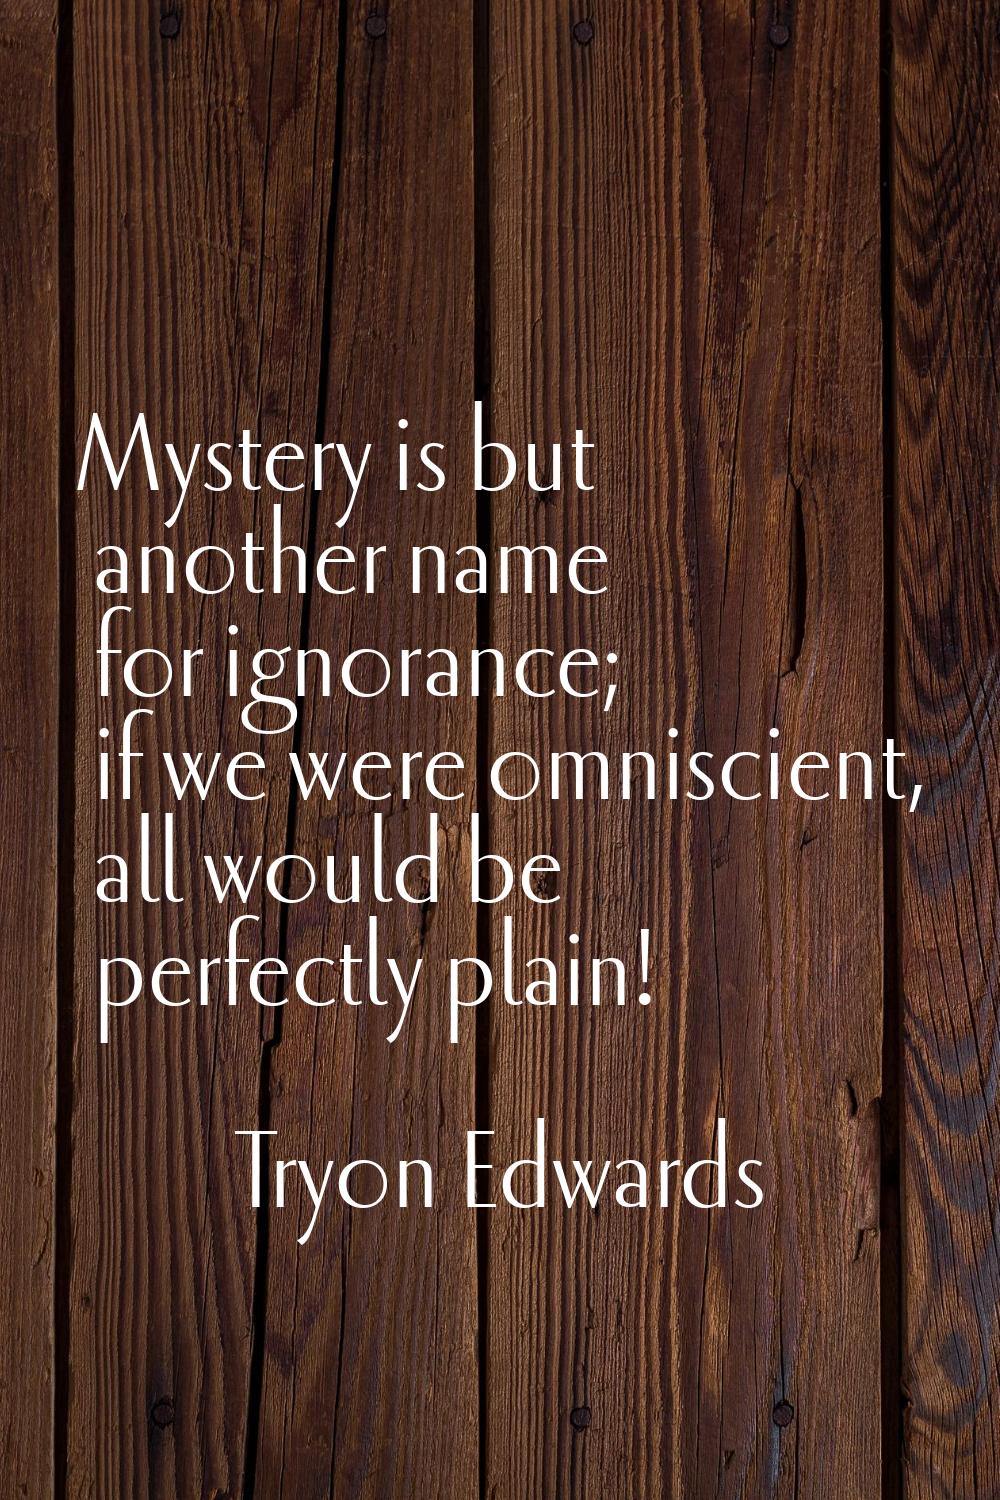 Mystery is but another name for ignorance; if we were omniscient, all would be perfectly plain!